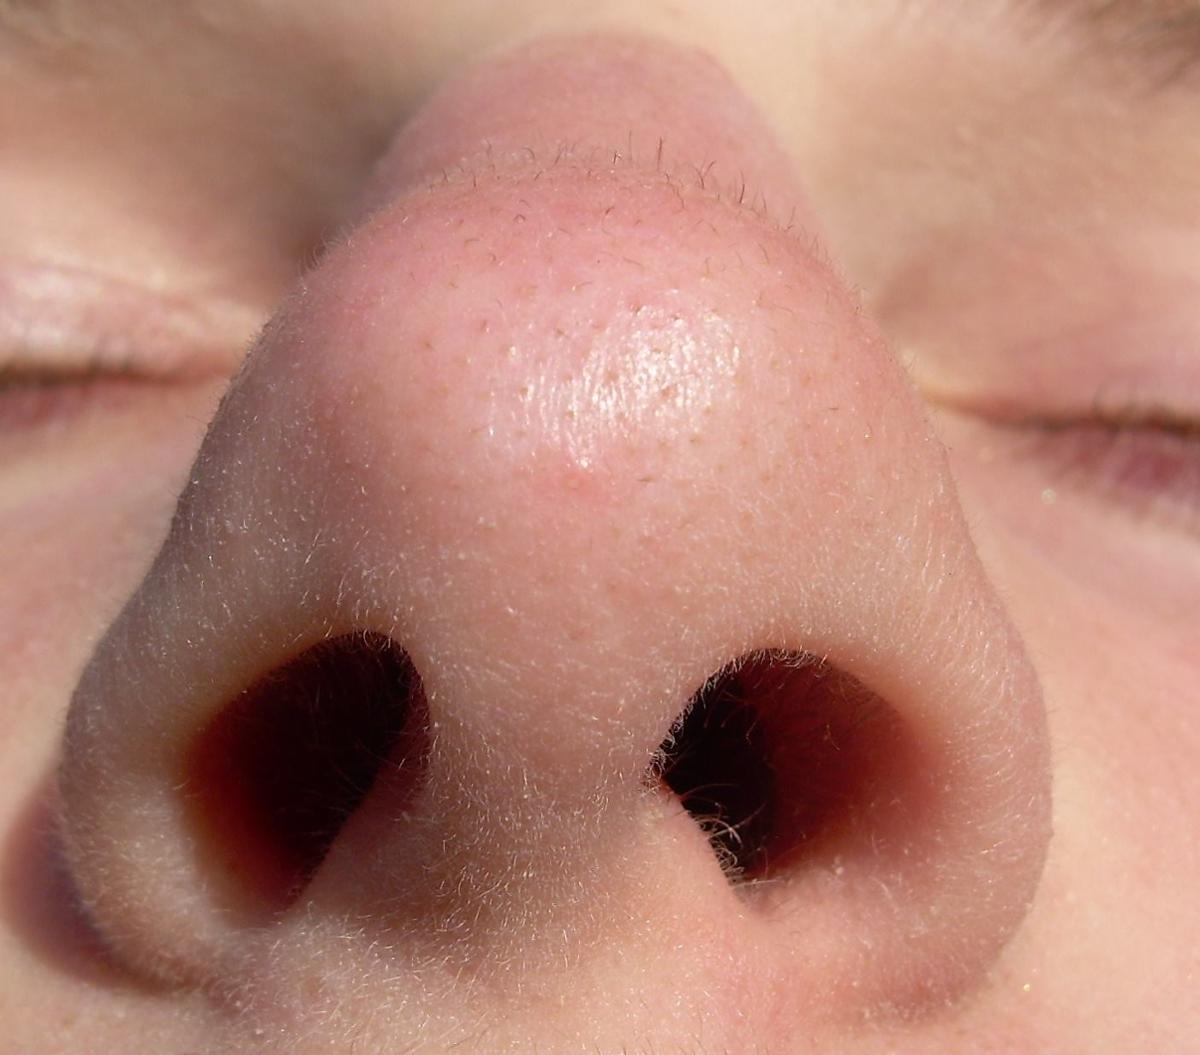 An extreme closeup of a nose, nostrils wide open and eyes closed